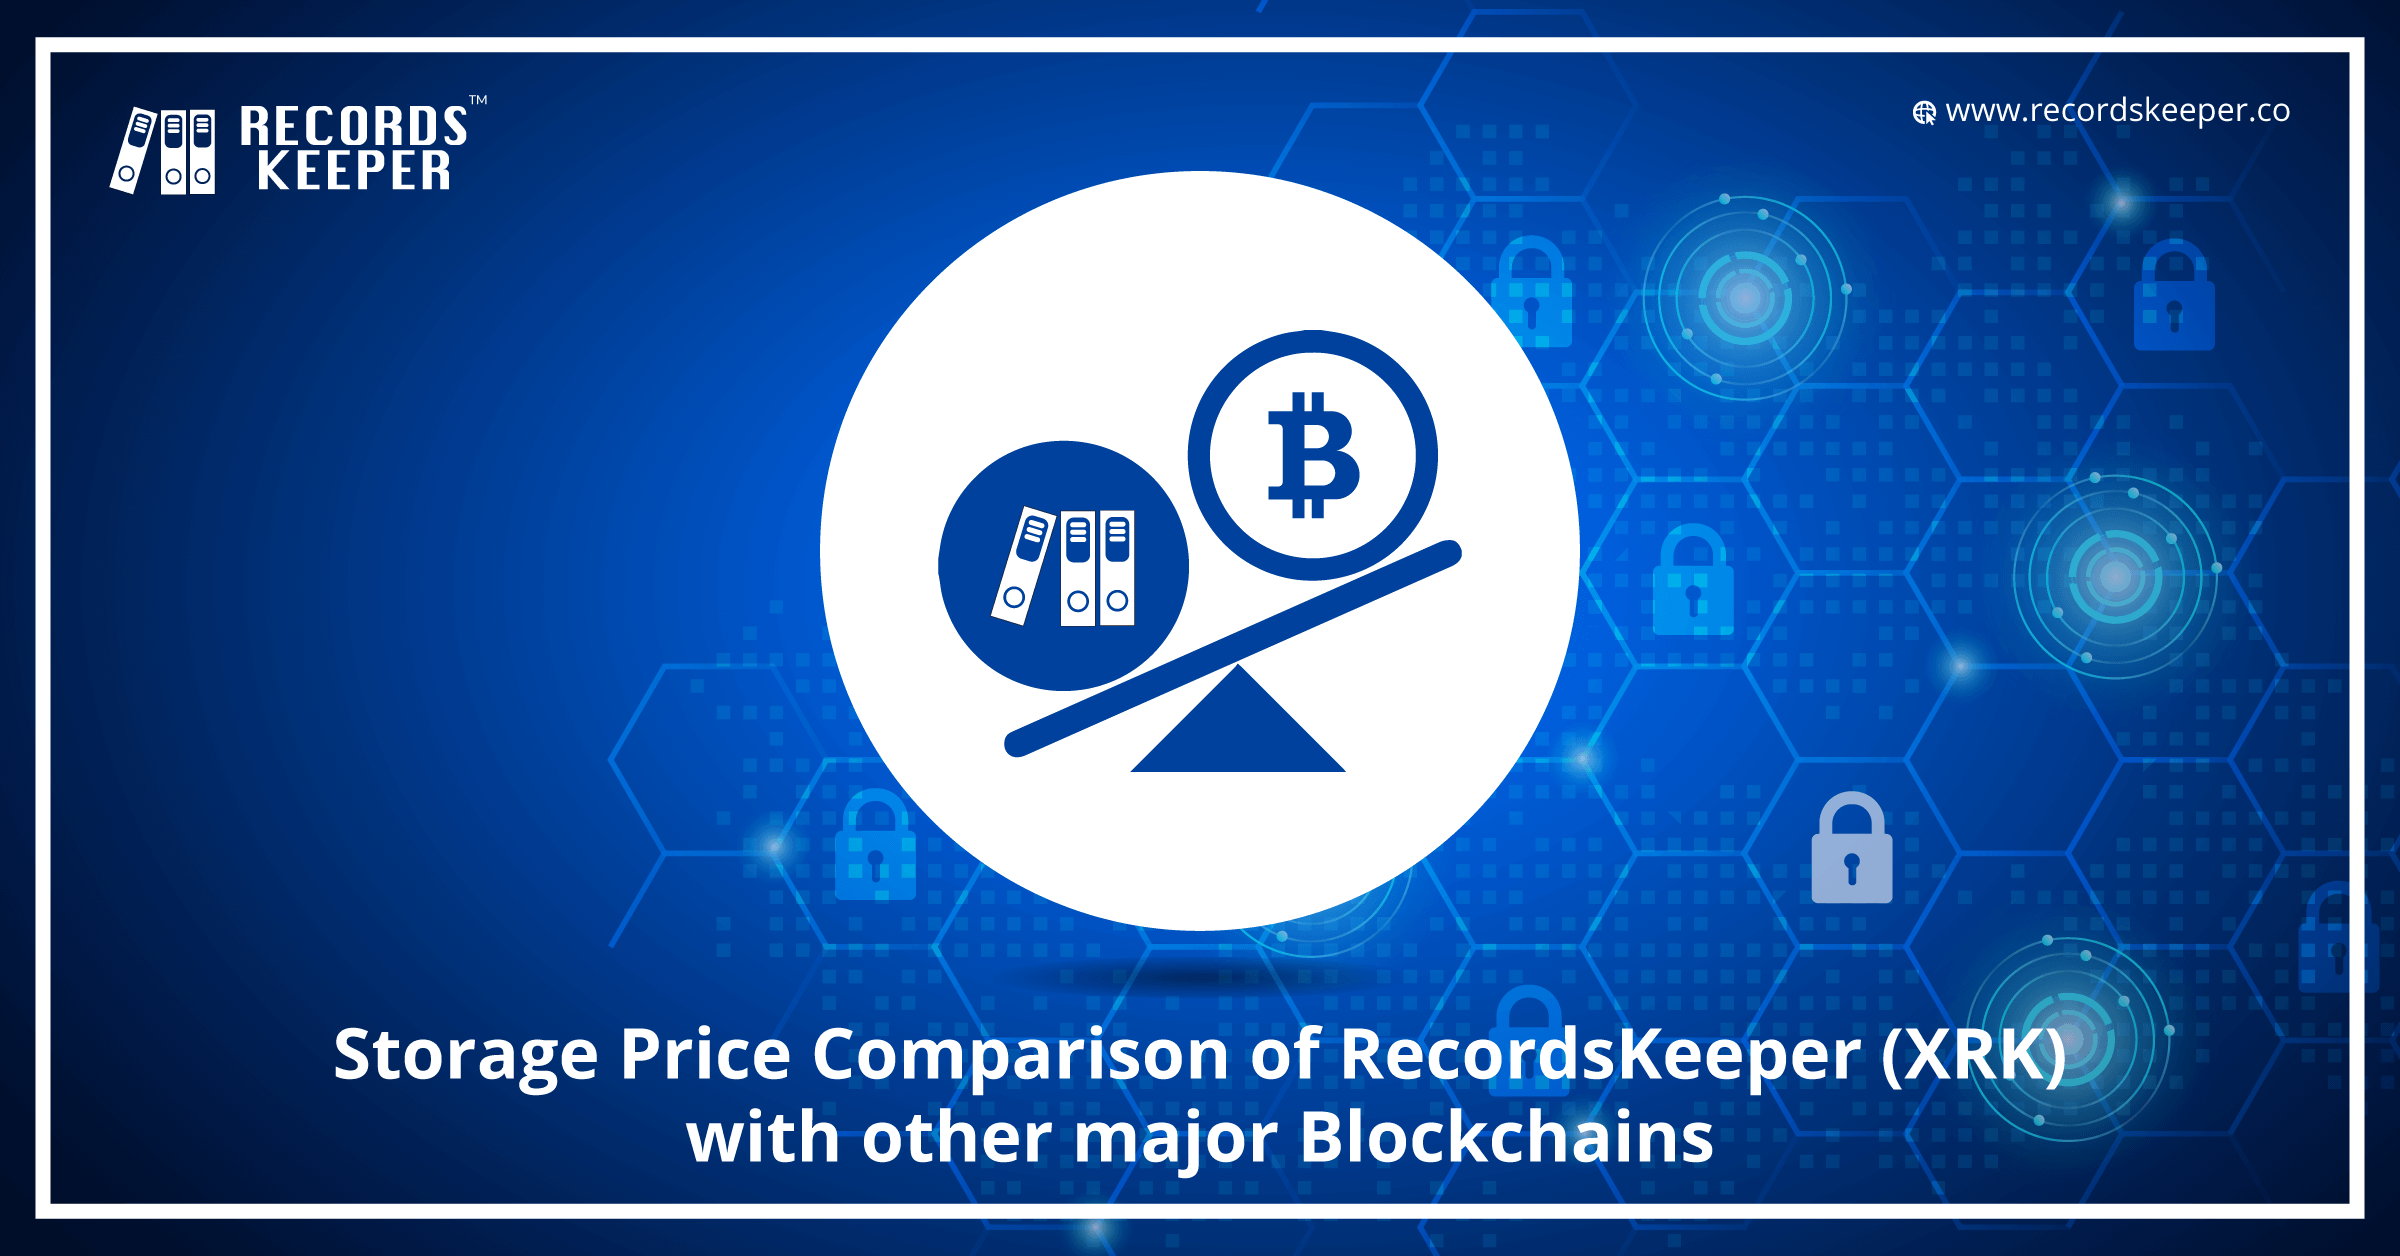 Storage Price Comparison of RecordsKeeper (XRK) with other major Blockchains